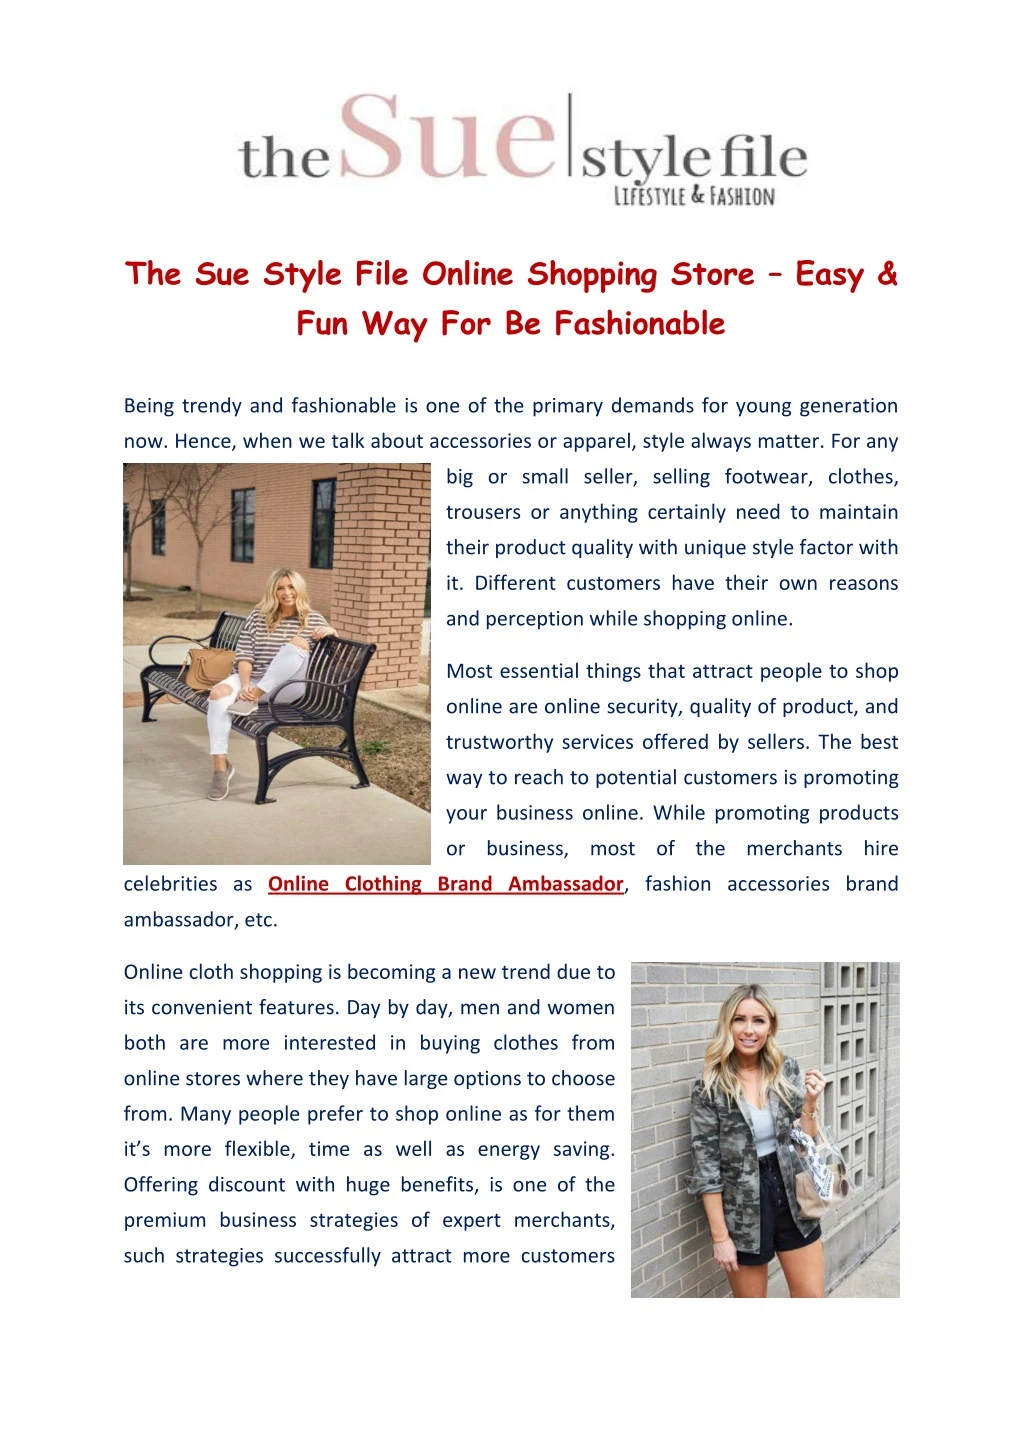 the sue style file online shopping store easy